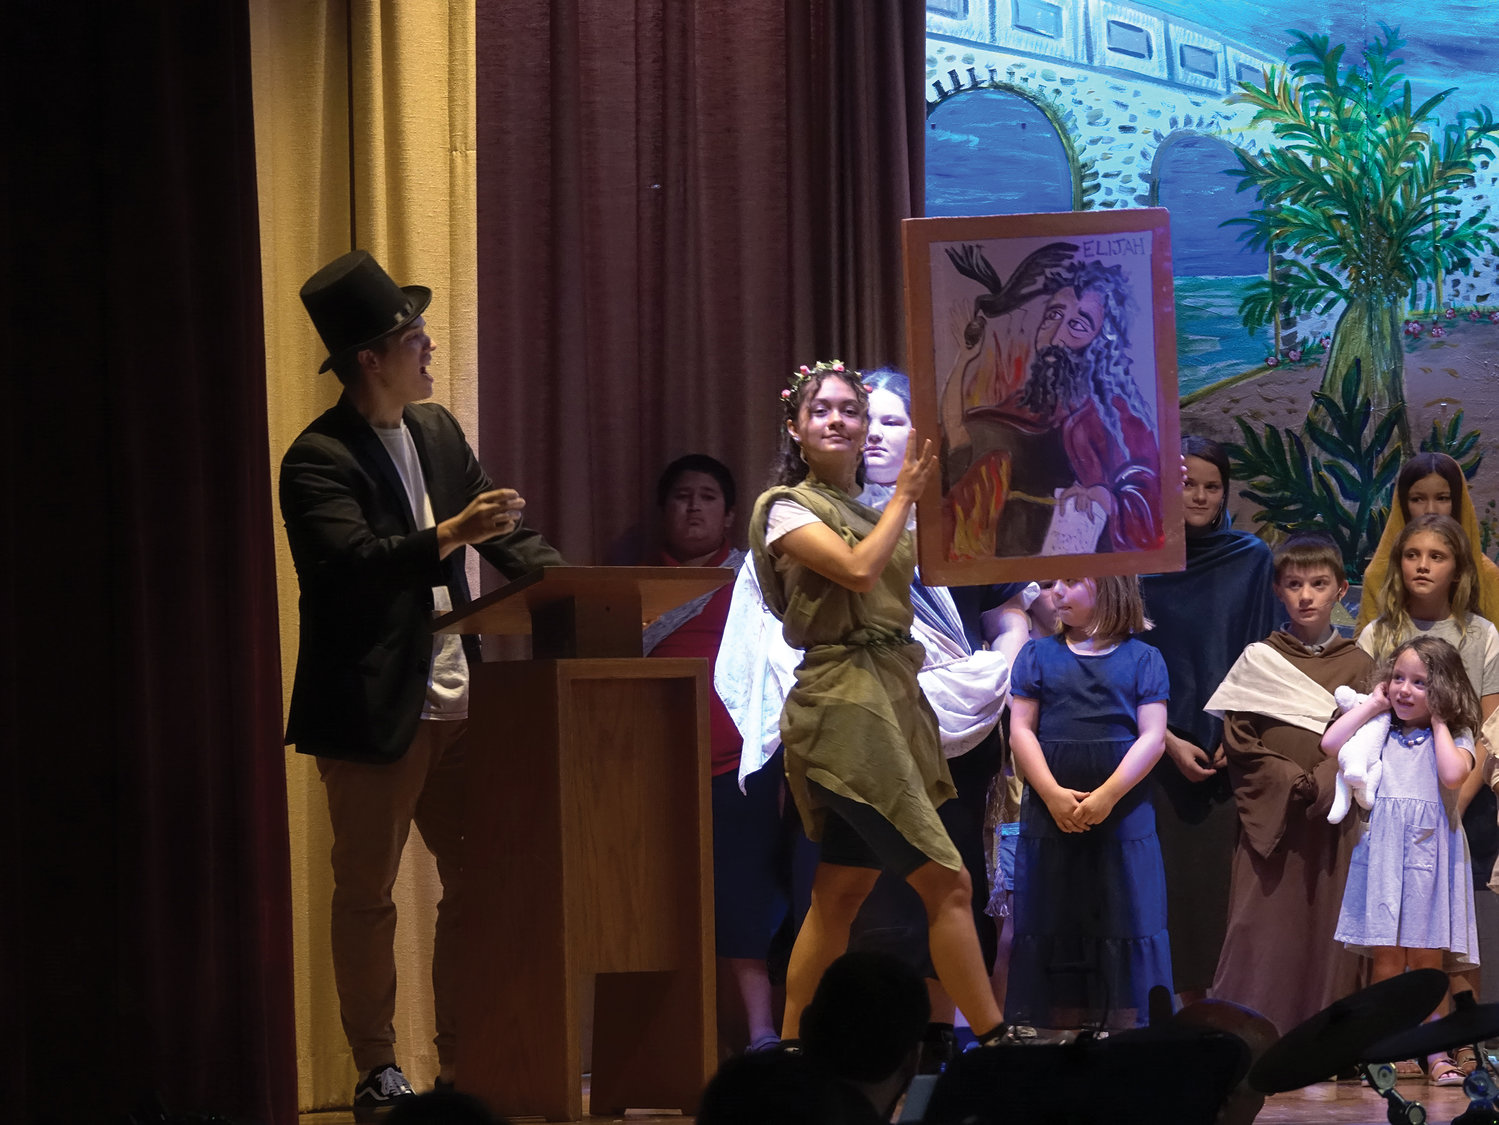 Juliana Barros holds a portrait of the Old Testament prophet Elijah during the Capuchin Youth & Family Ministries’ presentation of “Jonah and The Prophettes” Aug. 6 at St. Mary’s School in Wappingers Falls.